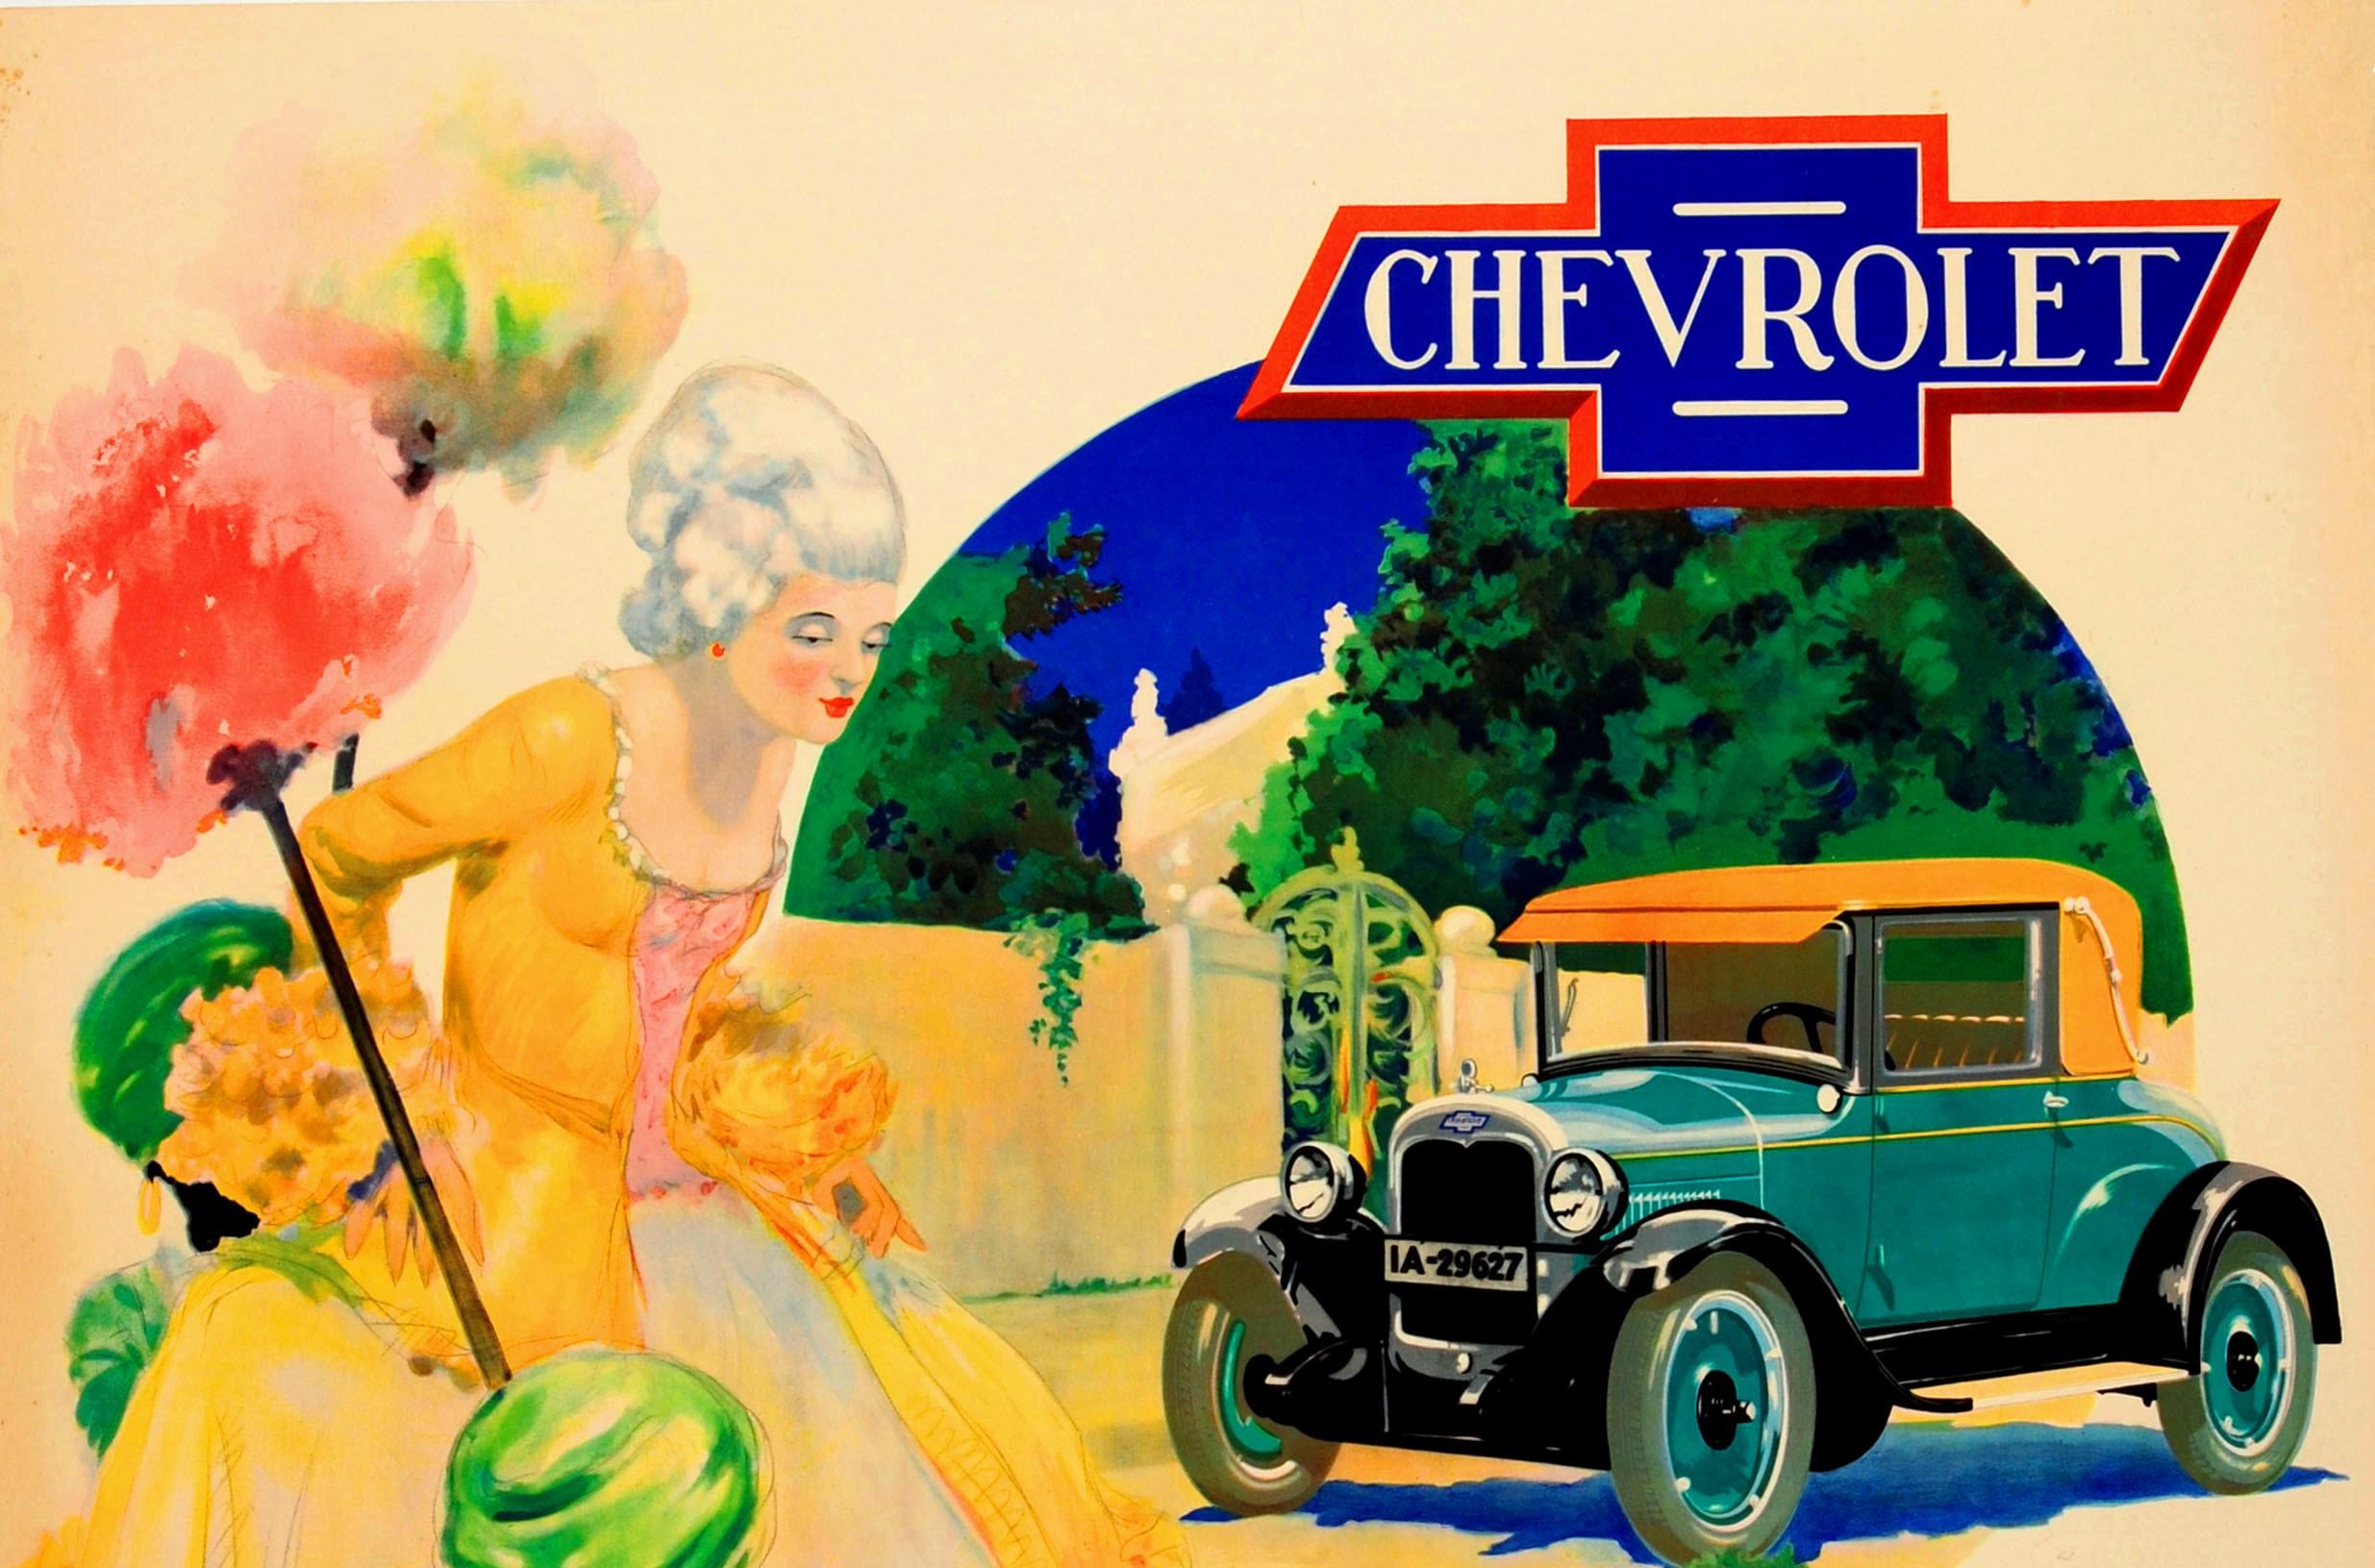 Original Vintage Chevrolet Classic Car Advertising Poster Most Elegant Small Car - Print by Emerich Huber